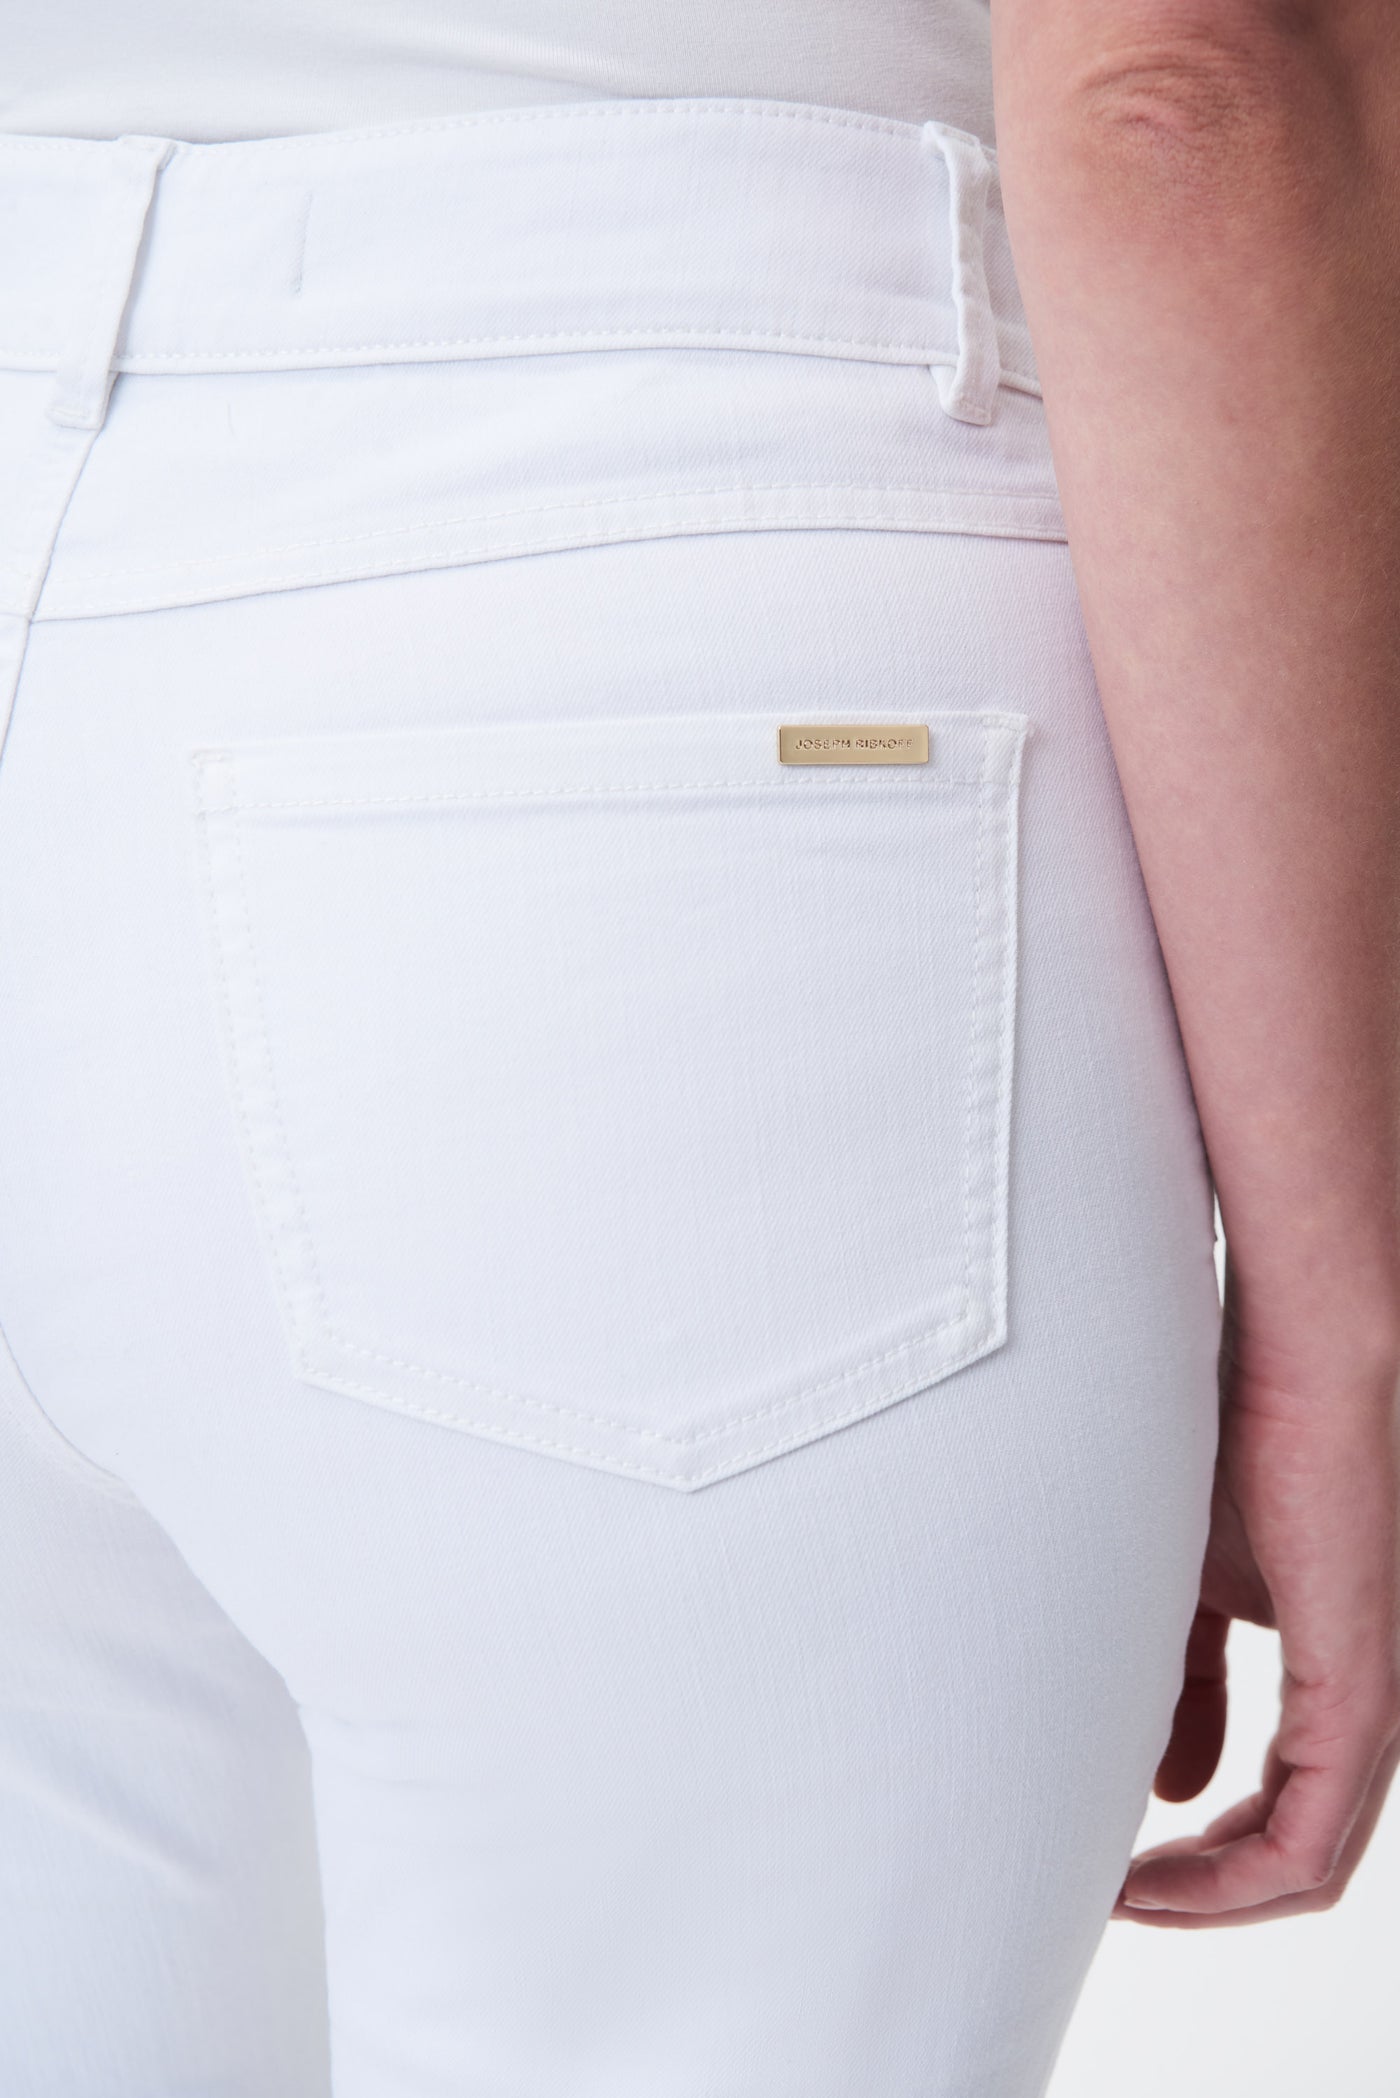 Cropped Flare Jean - White 232936